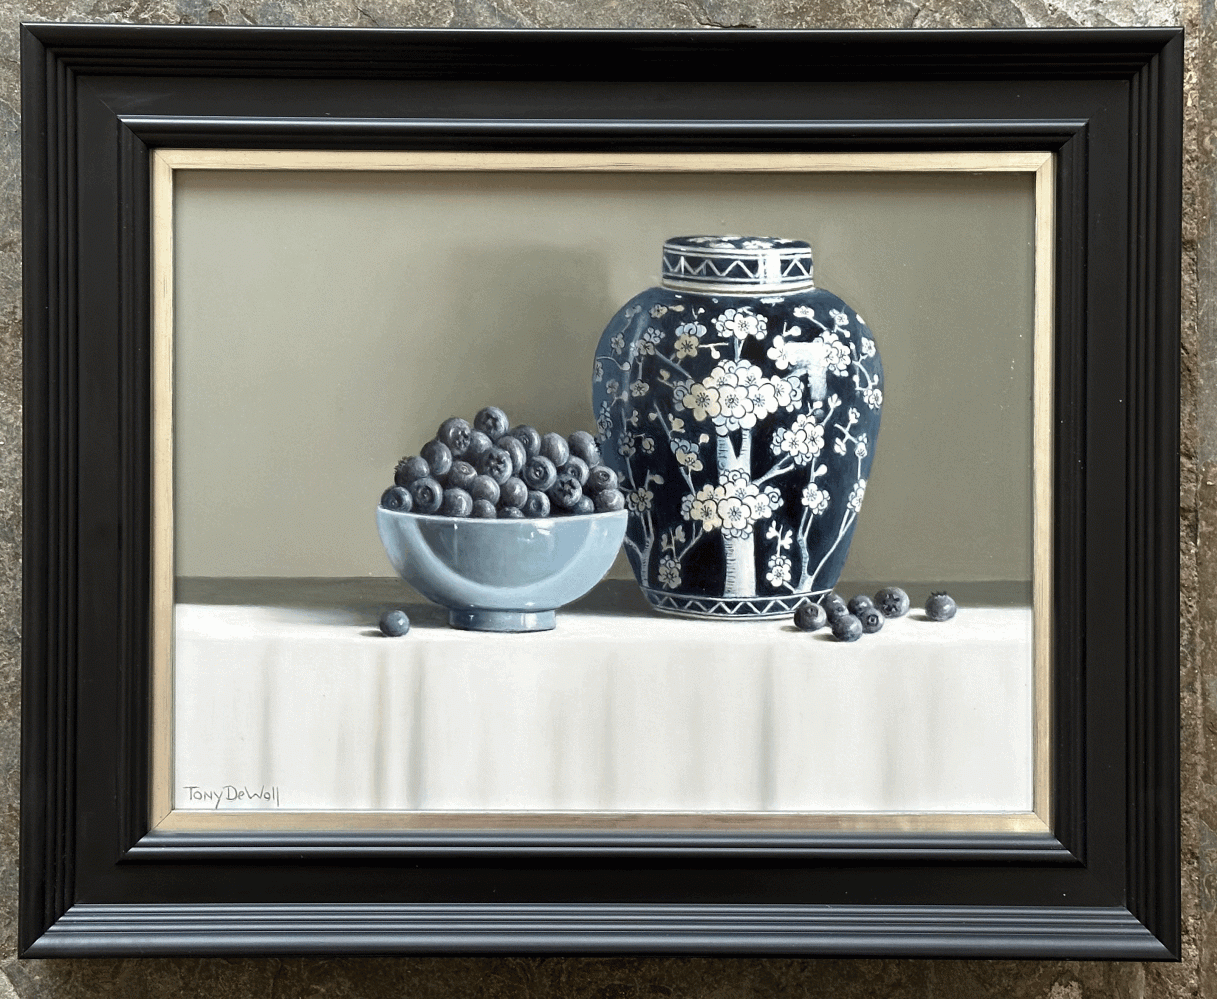 Tony  De Wolf Chinese Jar & Blueberries in Blue Bowl